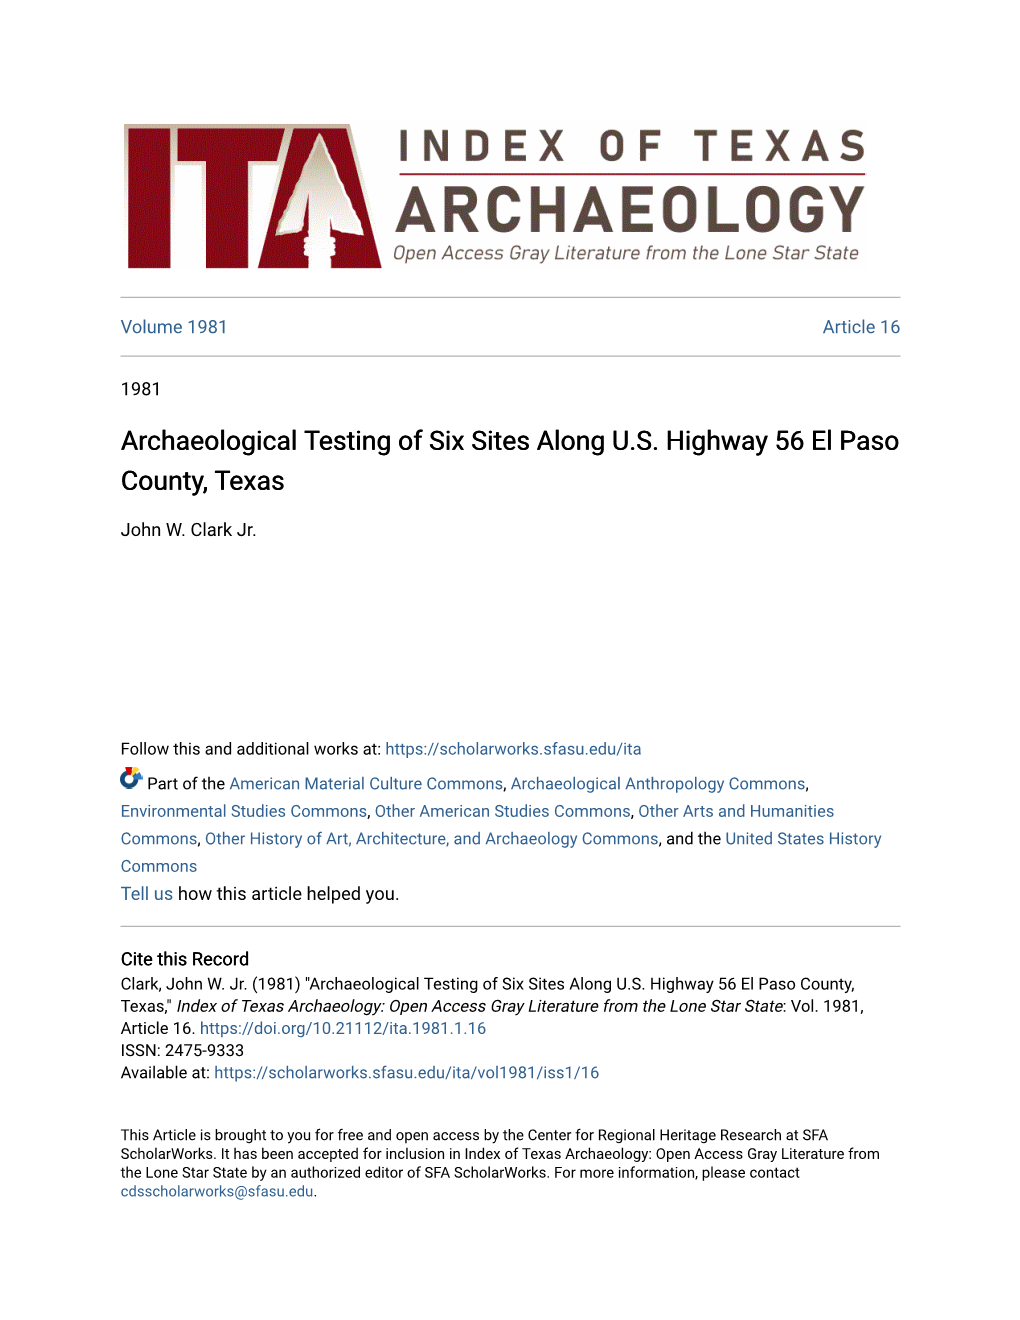 Archaeological Testing of Six Sites Along U.S. Highway 56 El Paso County, Texas